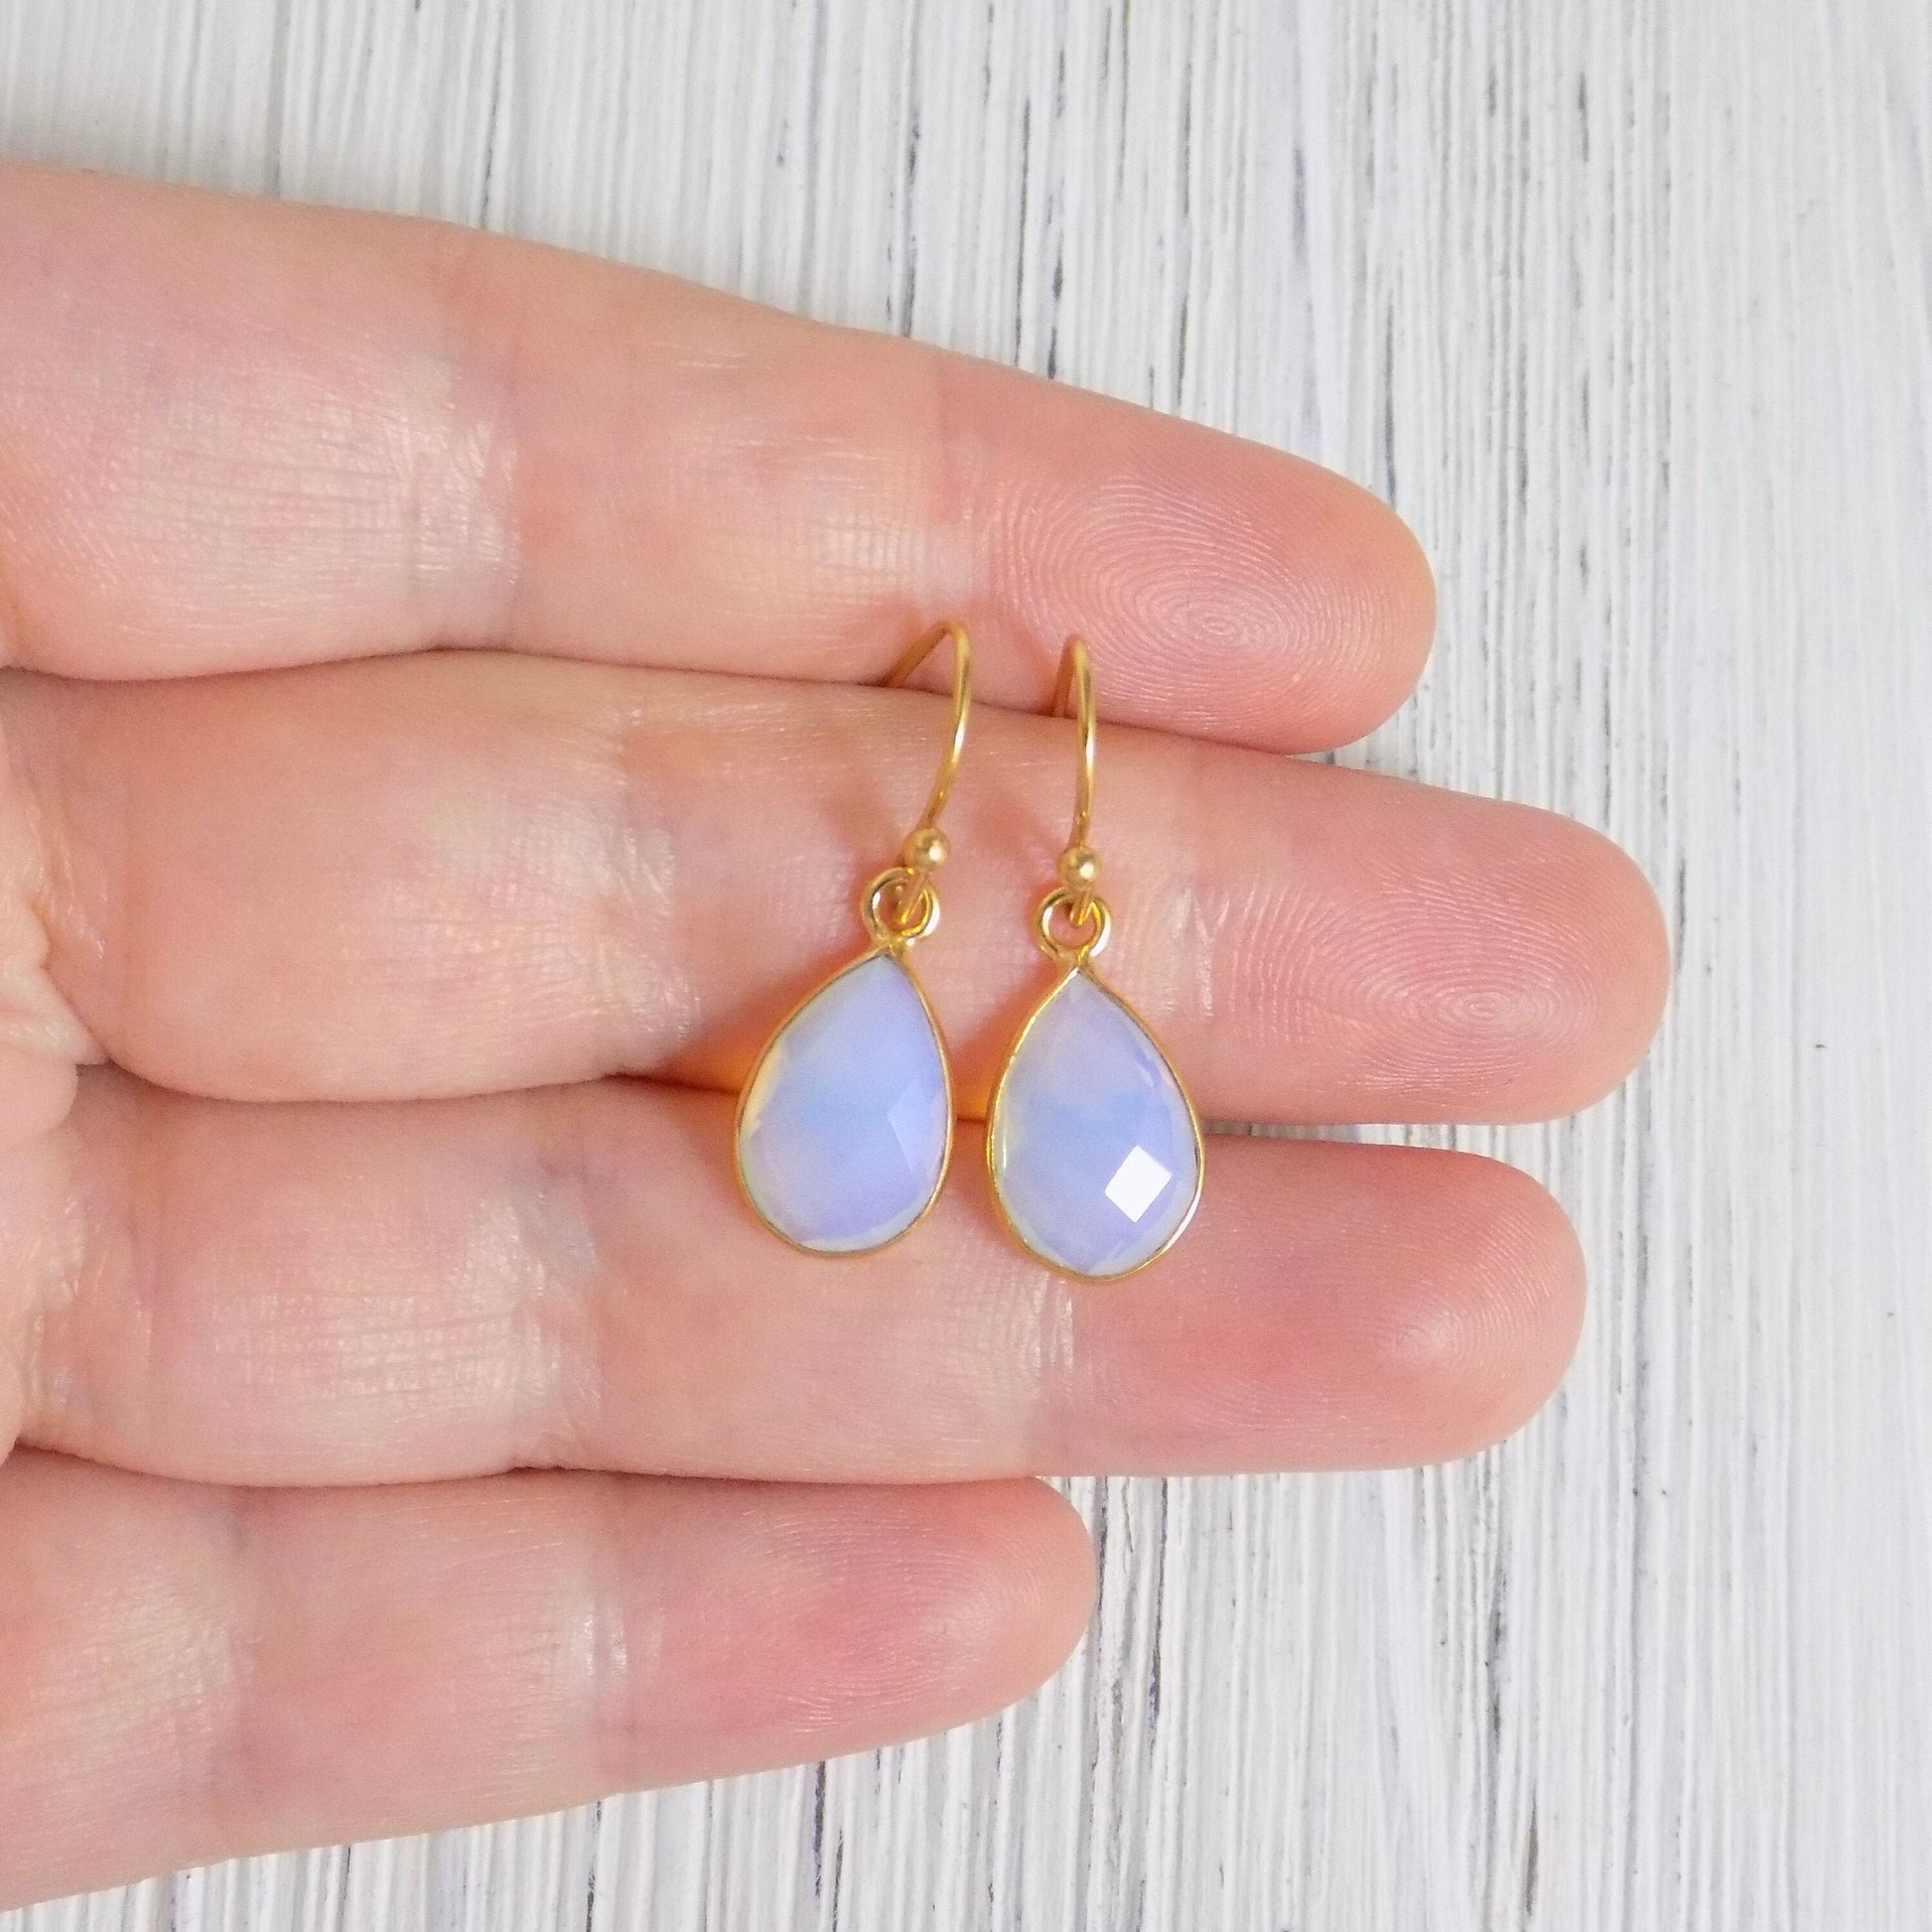 Mothers Day Gift, Opal Earrings Gold, Opalite Earring, Small Light Blue Crystal Earrings, Bridal Jewelry, Gifts For Wife, M4-64